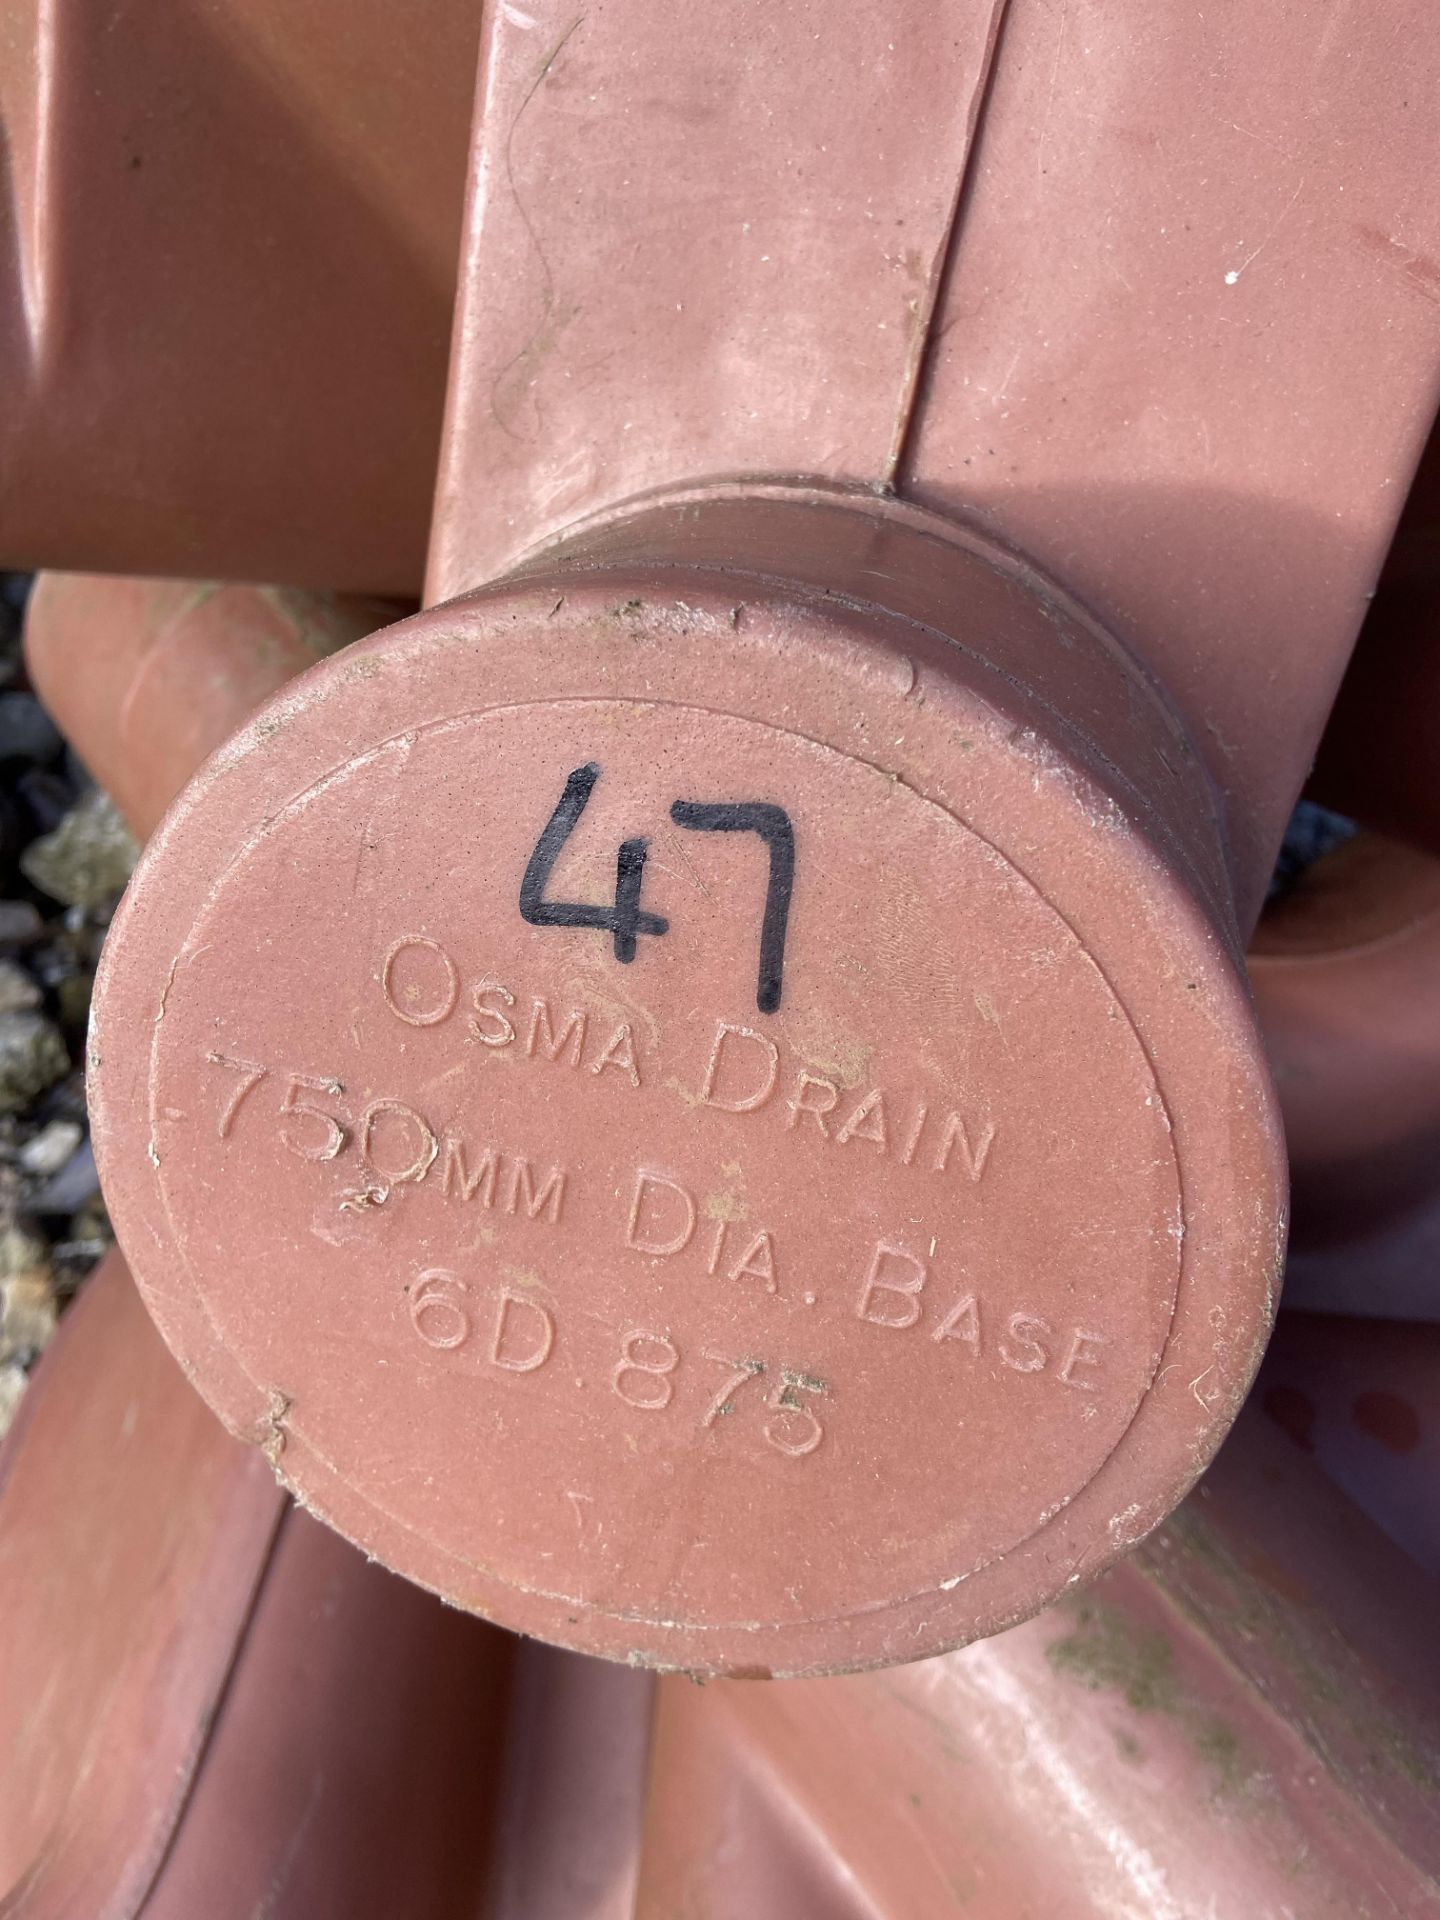 Osma Drain 750mm dia. Base 6D.875 Please read the following important notes:- Free loading will be - Image 2 of 2